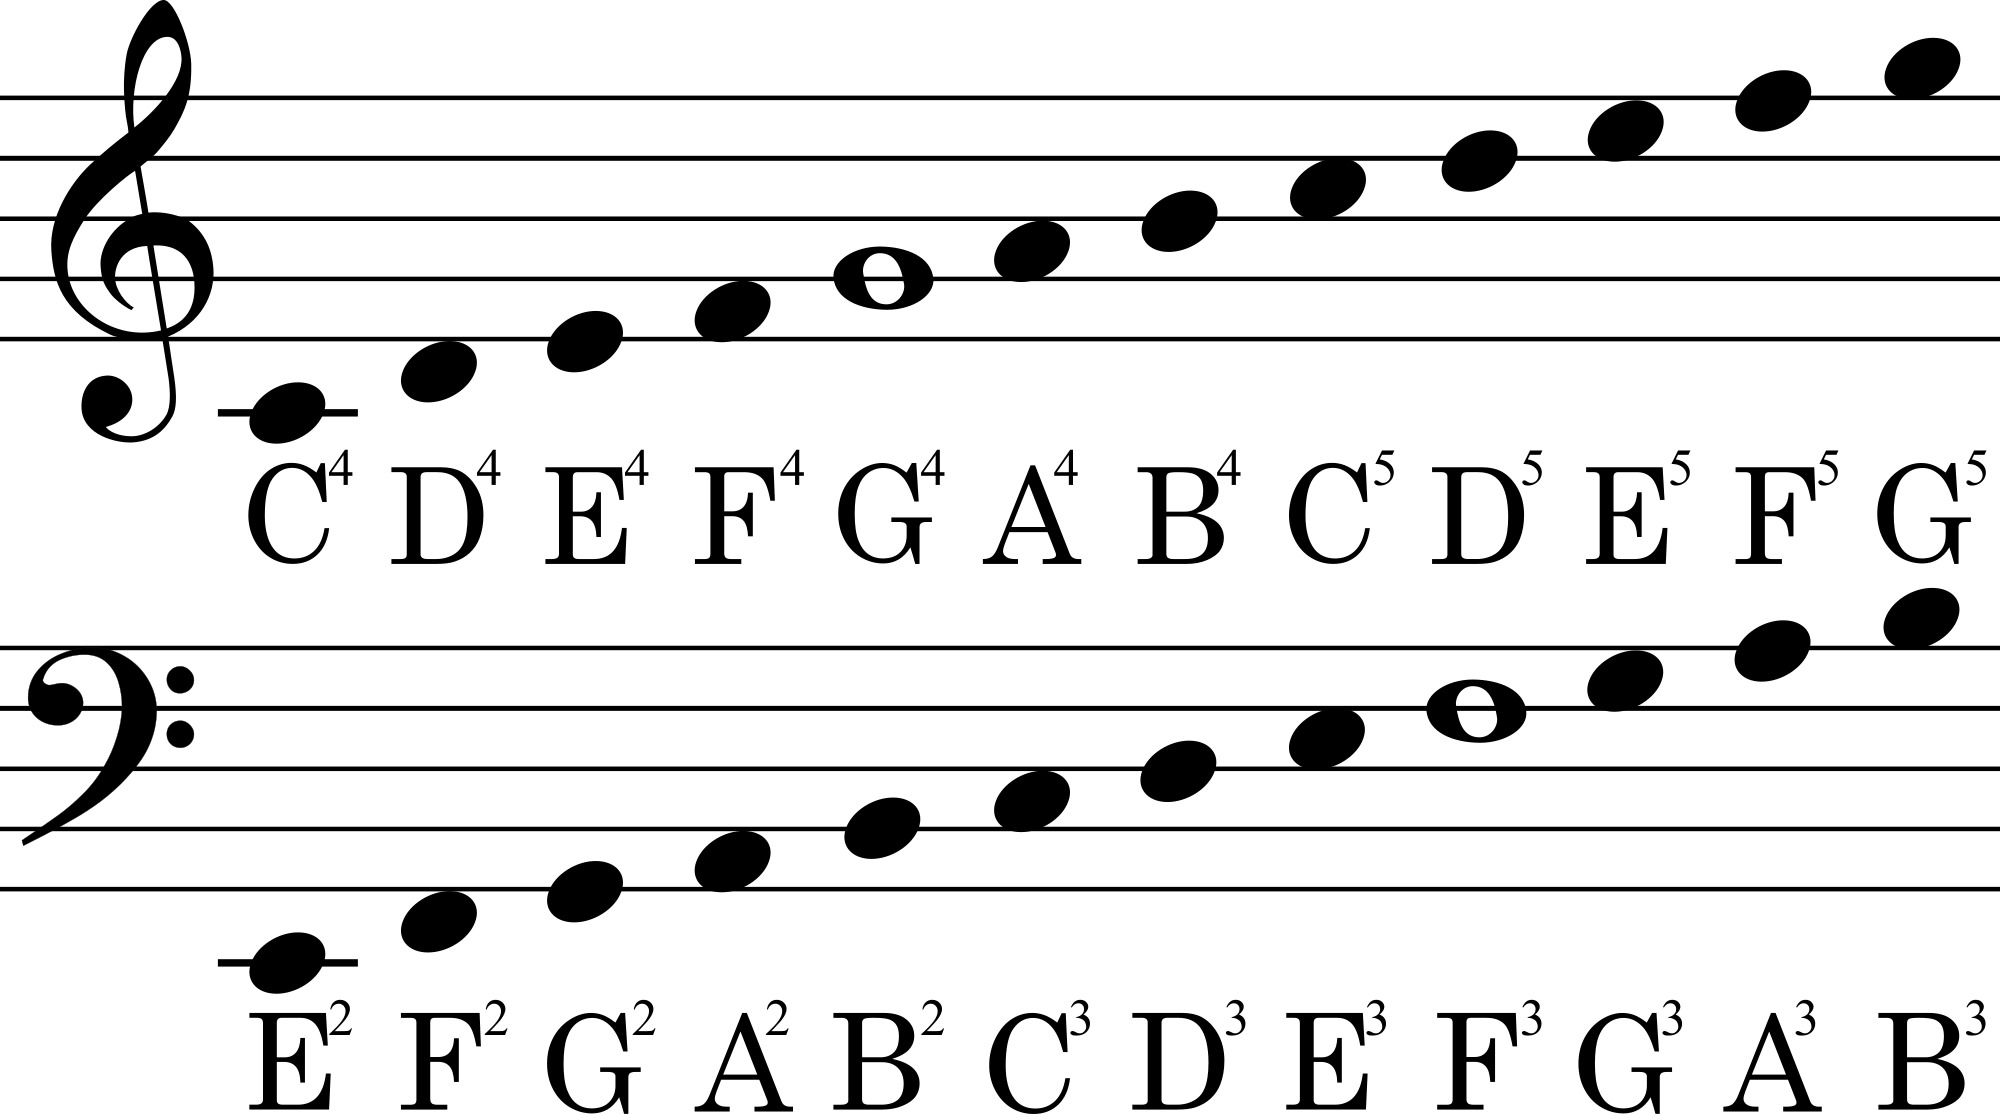 What Note Comes First On Sheet Music